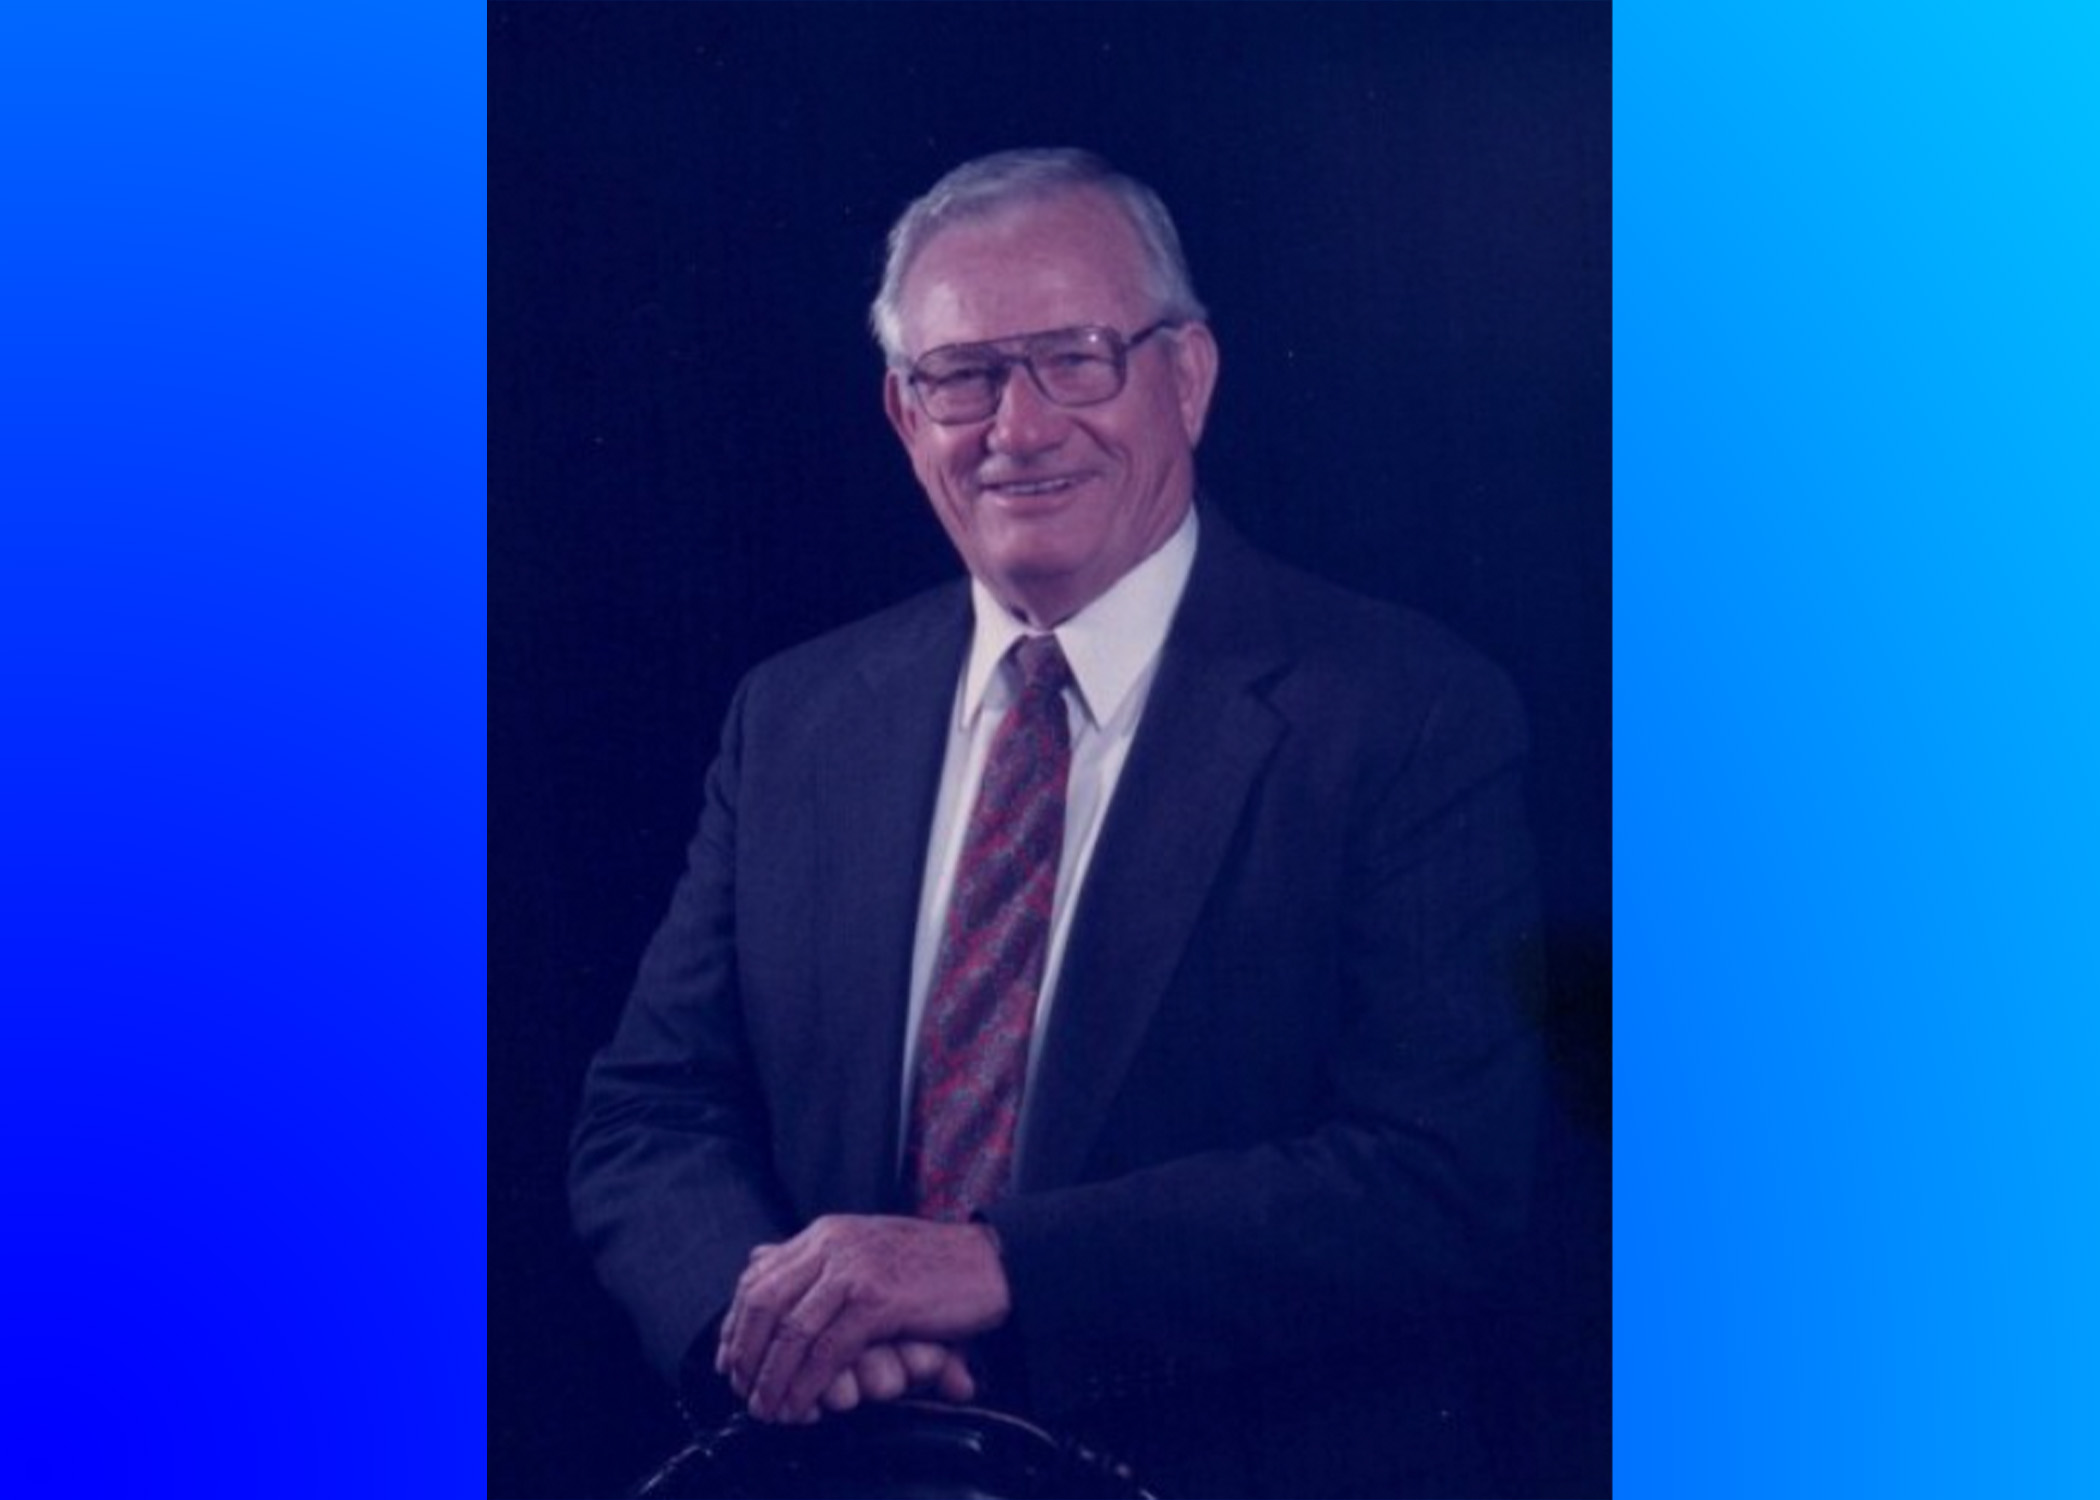 Obituary: Lee Coston Stalnaker (August 22, 1926 ~ March 29, 2022)